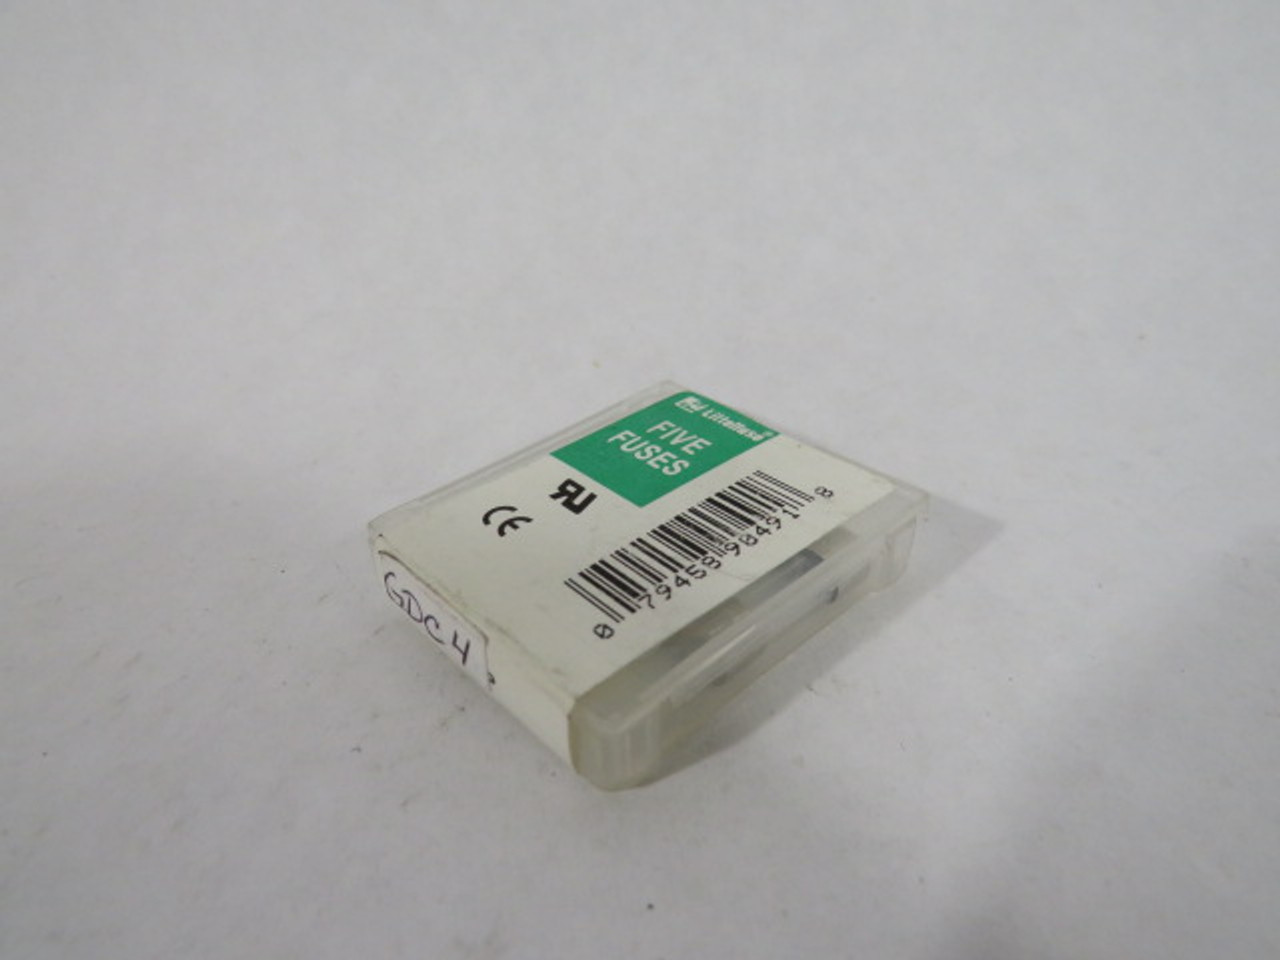 Littelfuse GDC-4 Slow Blow Glass Fuse 4A 250V 5-Pack ! NEW !